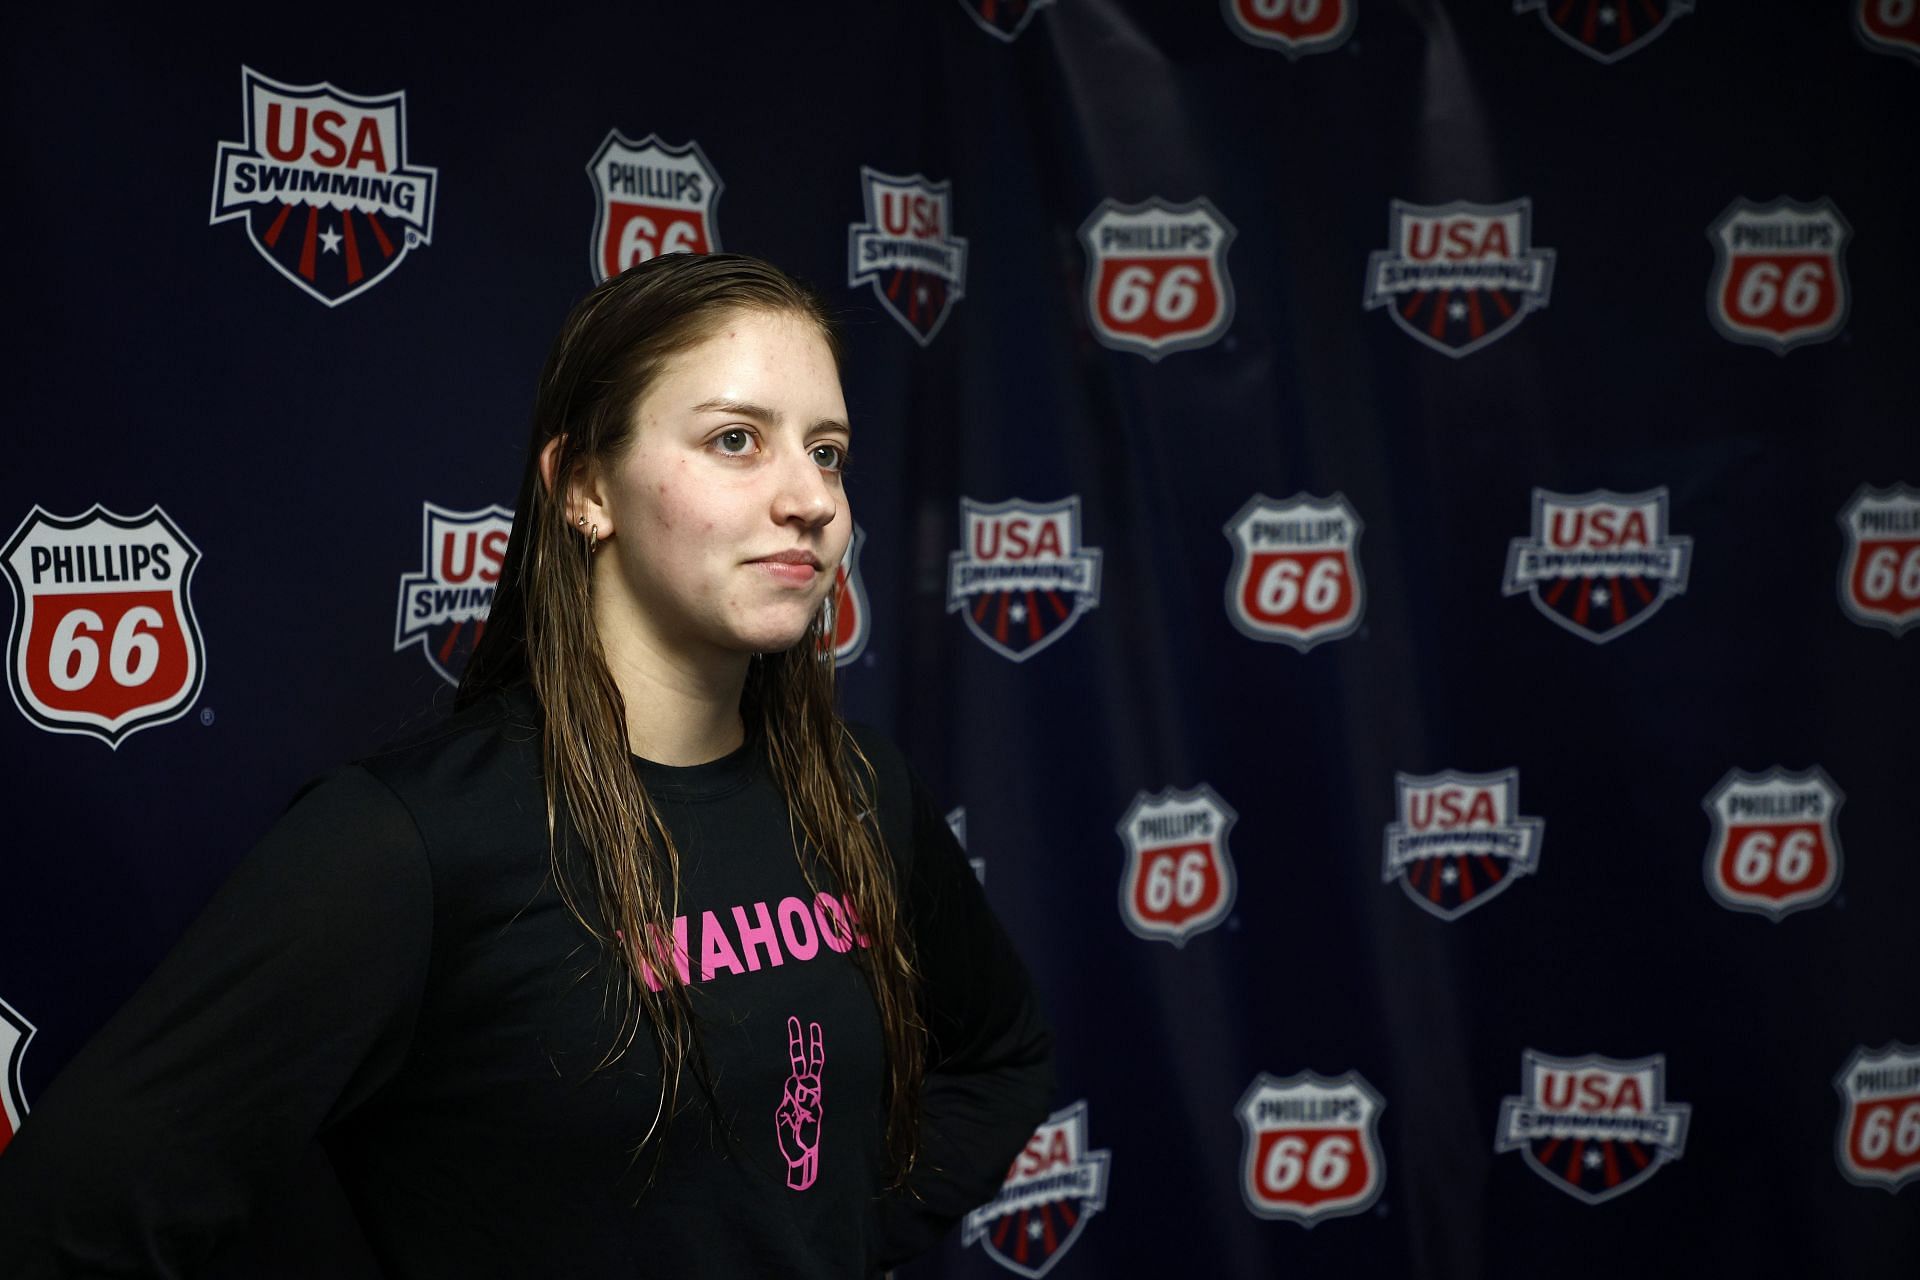 Kate speaks with the media on Day Two of the Phillips 66 International Team Trials at the Greensboro Aquatic Center